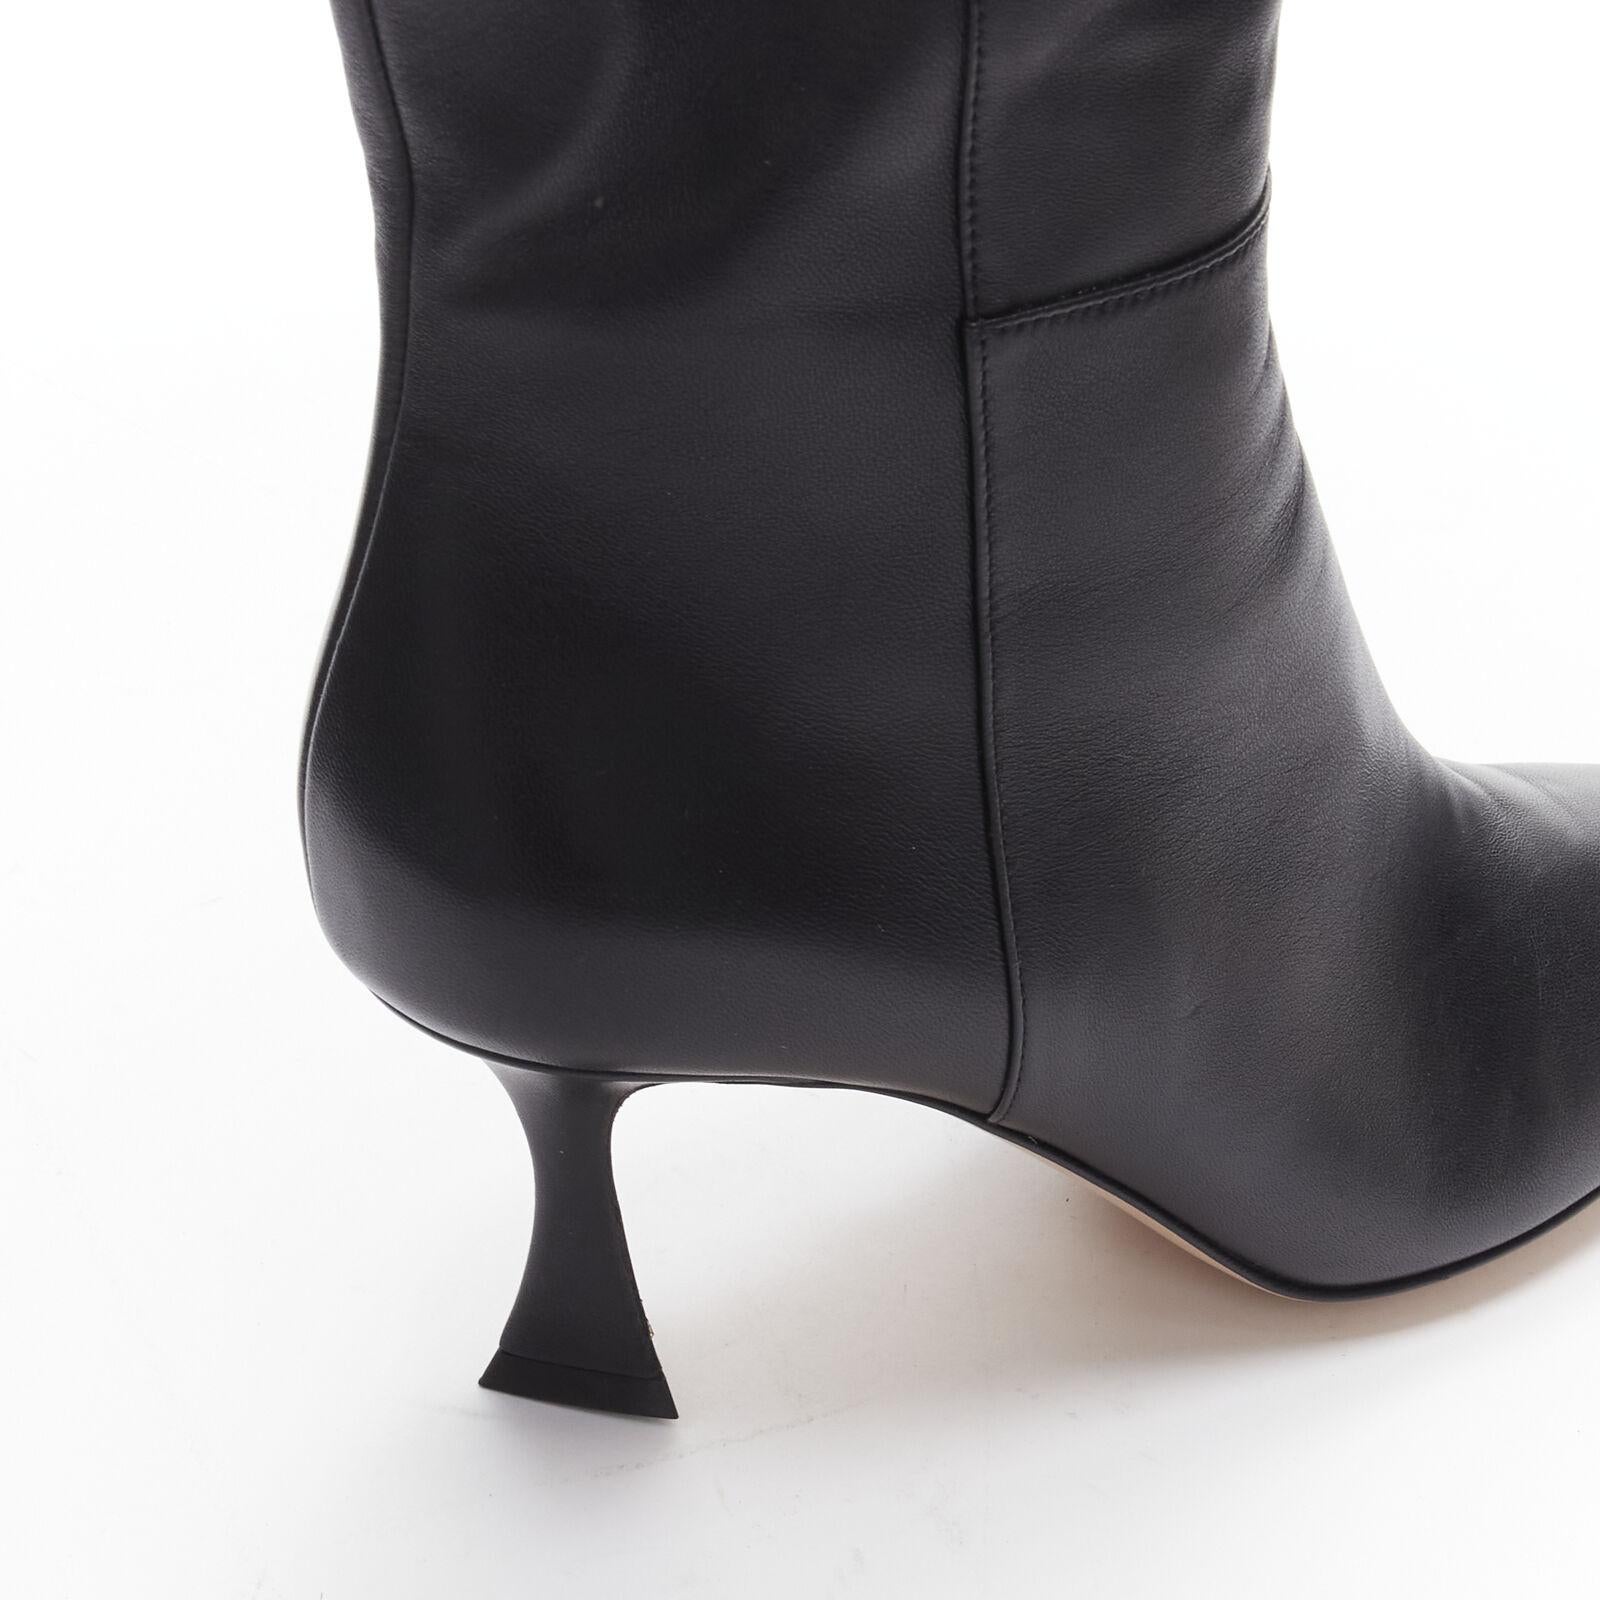 GIANVITO ROSSI black leather point toe spool heeled tall boots EU39 US9
Reference: AAWC/A00129
Brand: Gianvito Rossi
Material: Leather
Color: Black
Pattern: Solid
Closure: Zip
Lining: Leather
Extra Details: Leather panels. Logo zips at the